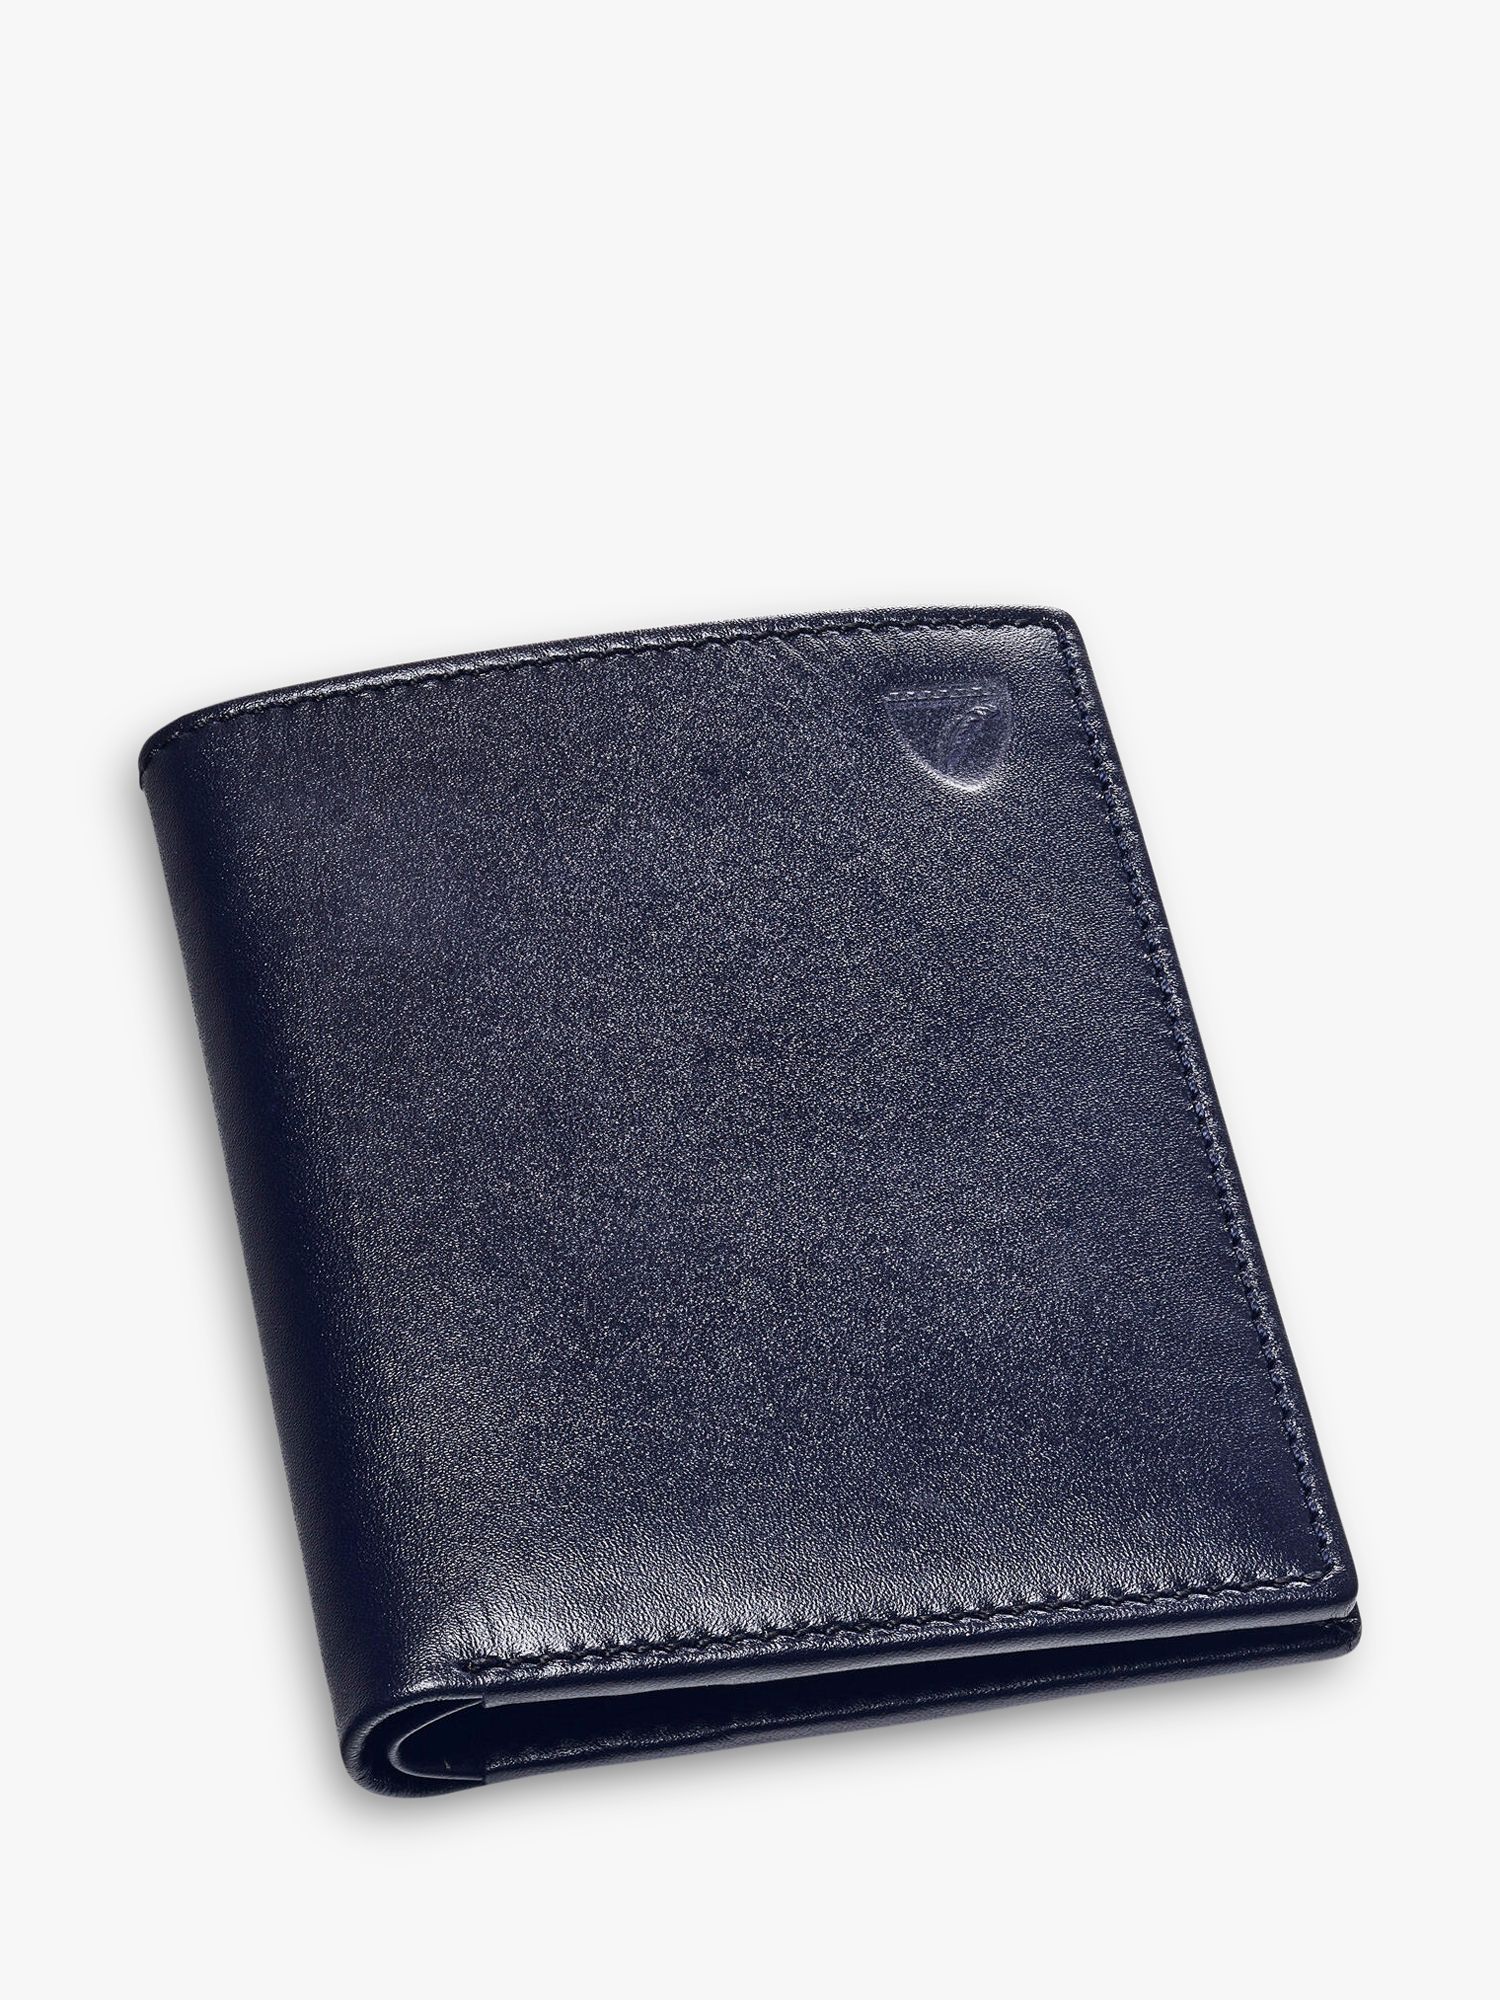 Buy Aspinal of London Smooth Leather Double Credit Card Wallet Online at johnlewis.com